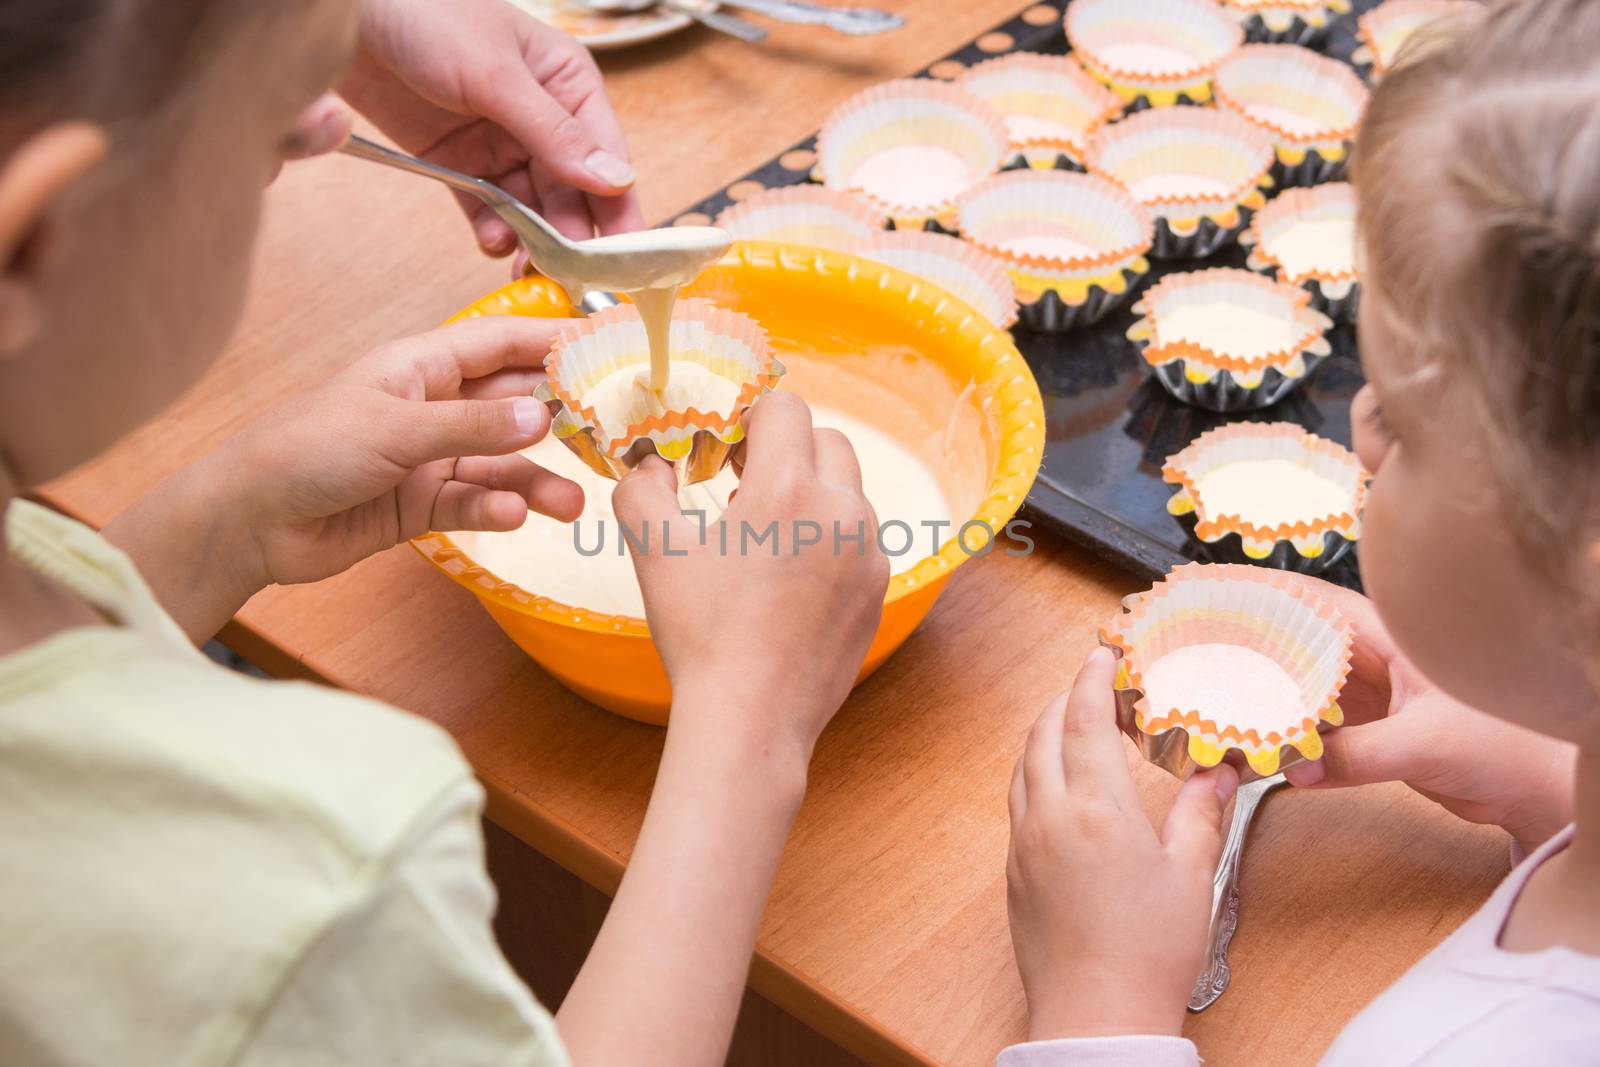 Two girls helped mom to pour batter into the molds for cupcakes